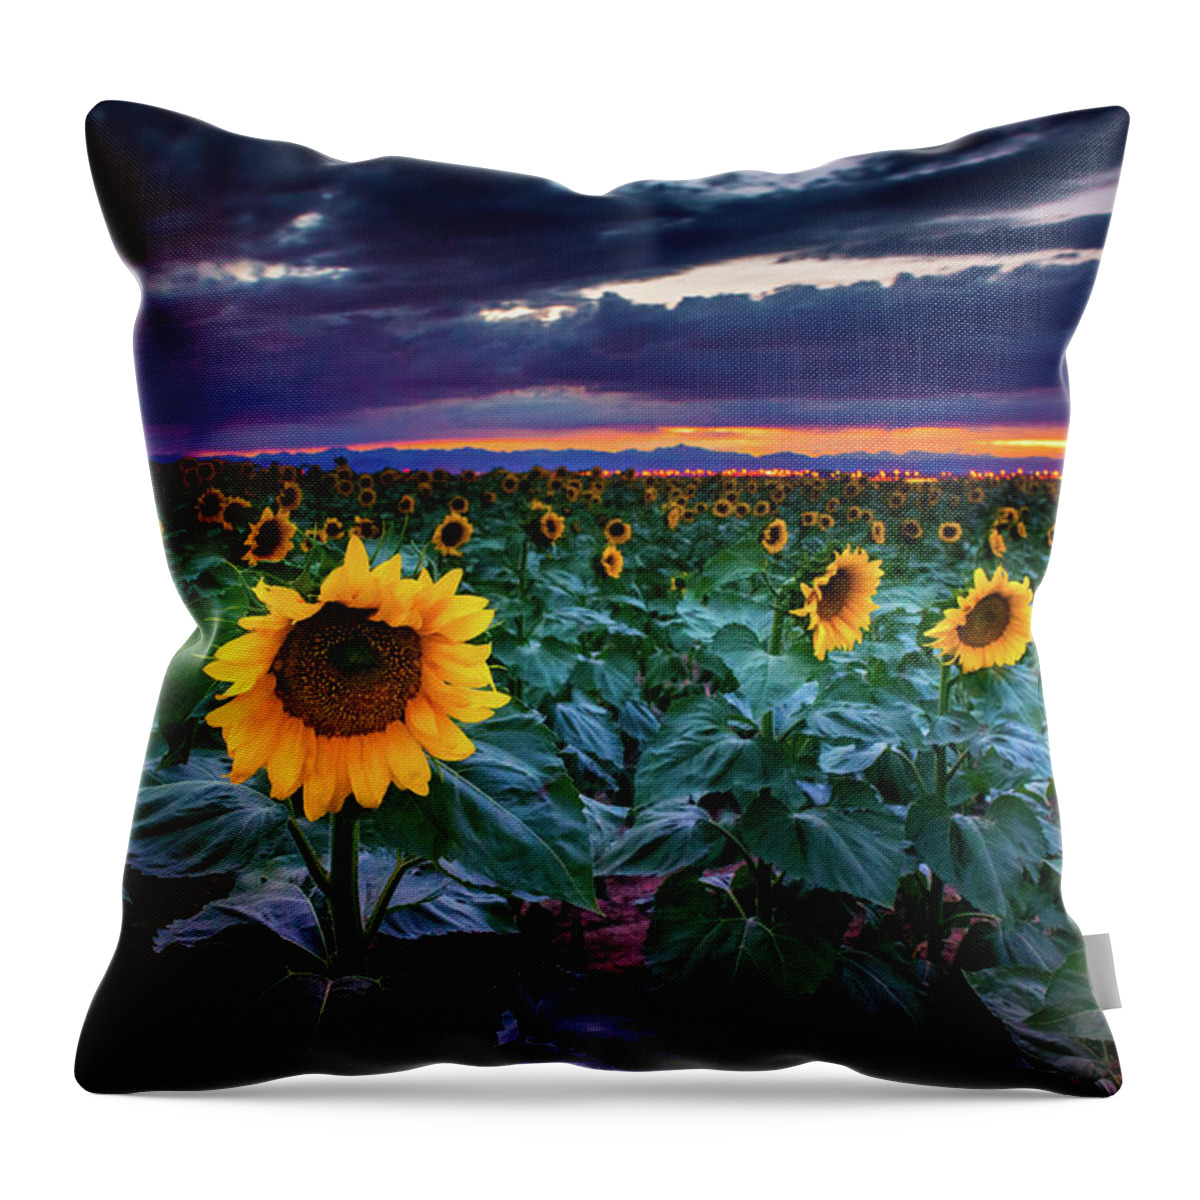 Aster Throw Pillow featuring the photograph After The Storm by John De Bord